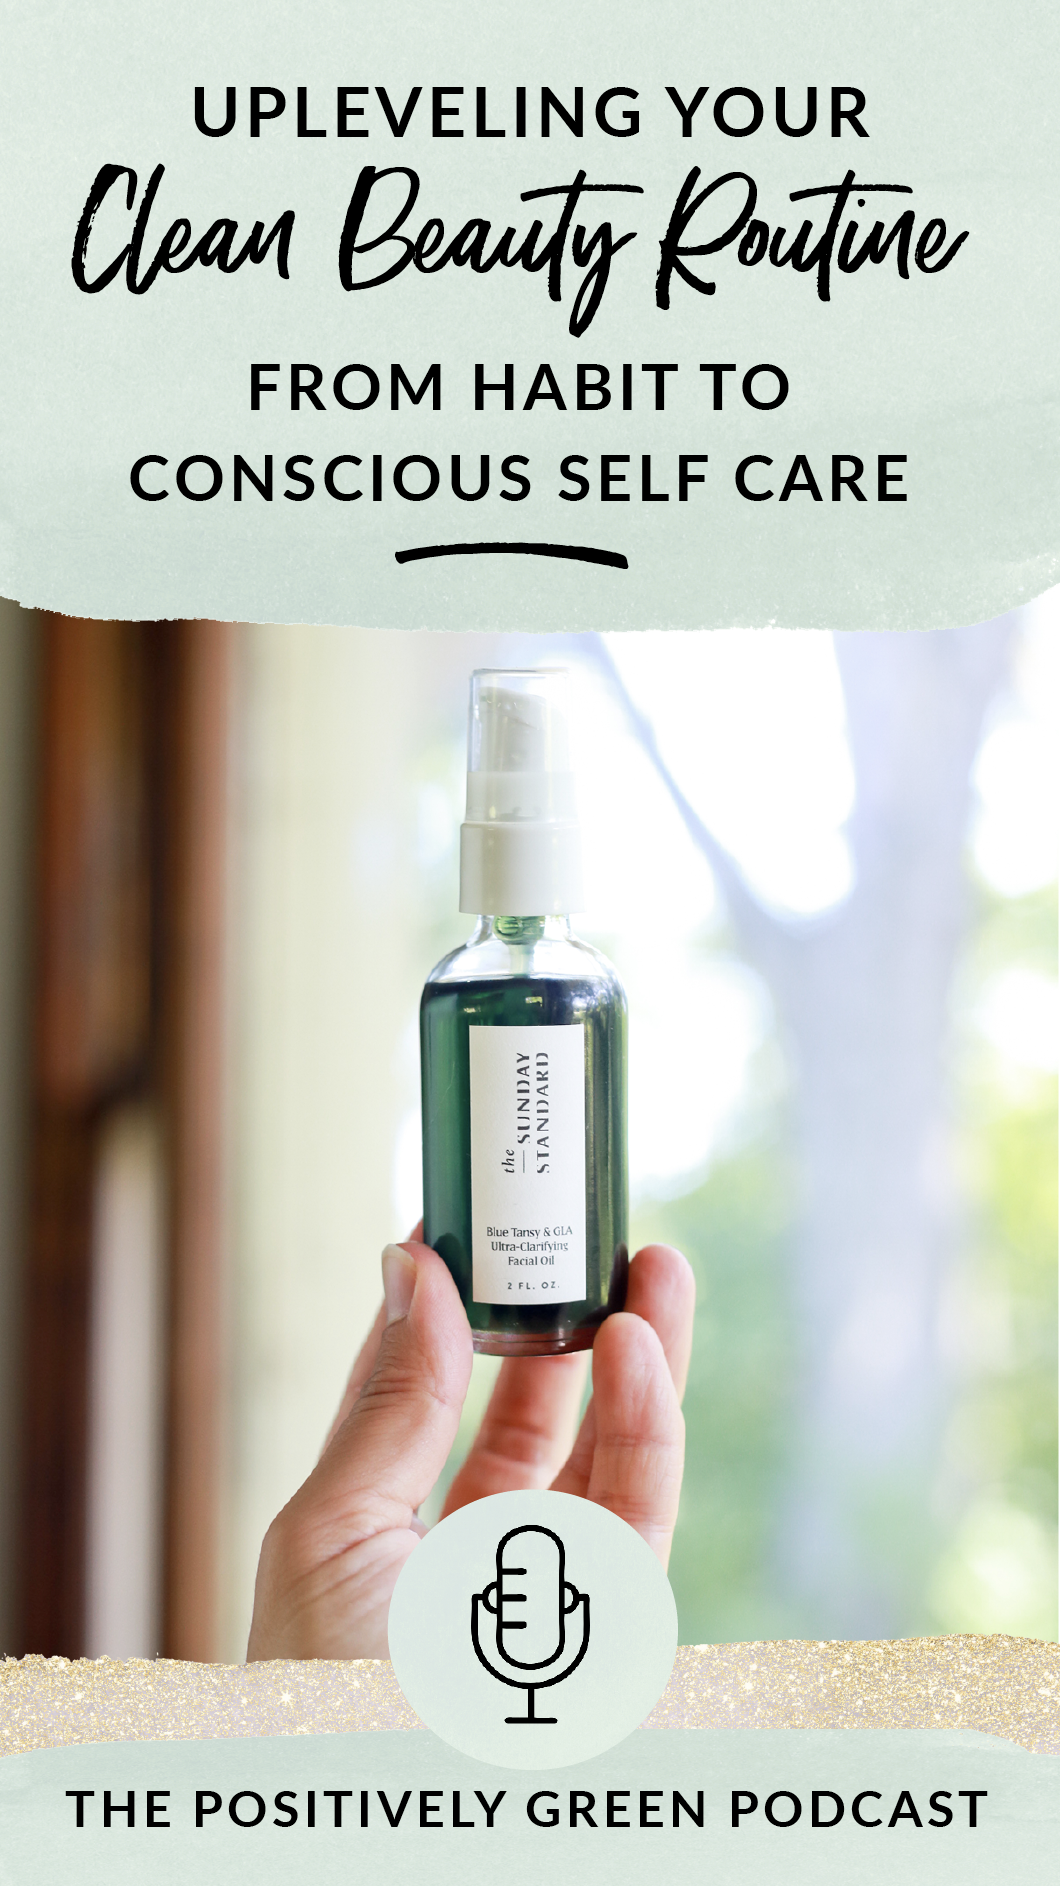 Upleveling your clean beauty routine from habit to conscious self care Episode 20 The Positively Green Podcast